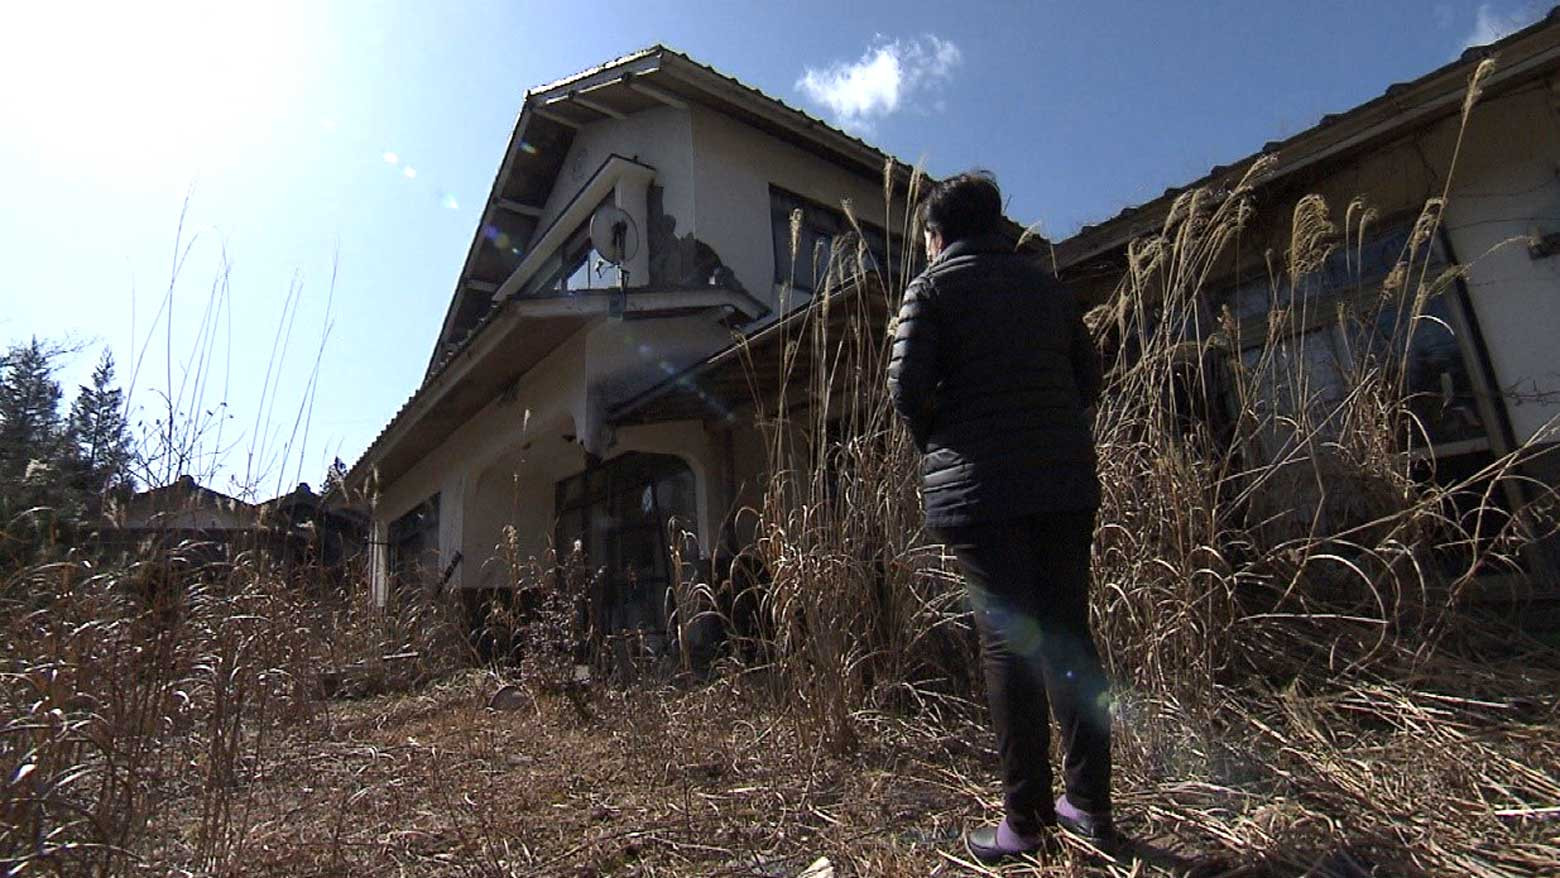 A herb offers hope in Fukushima